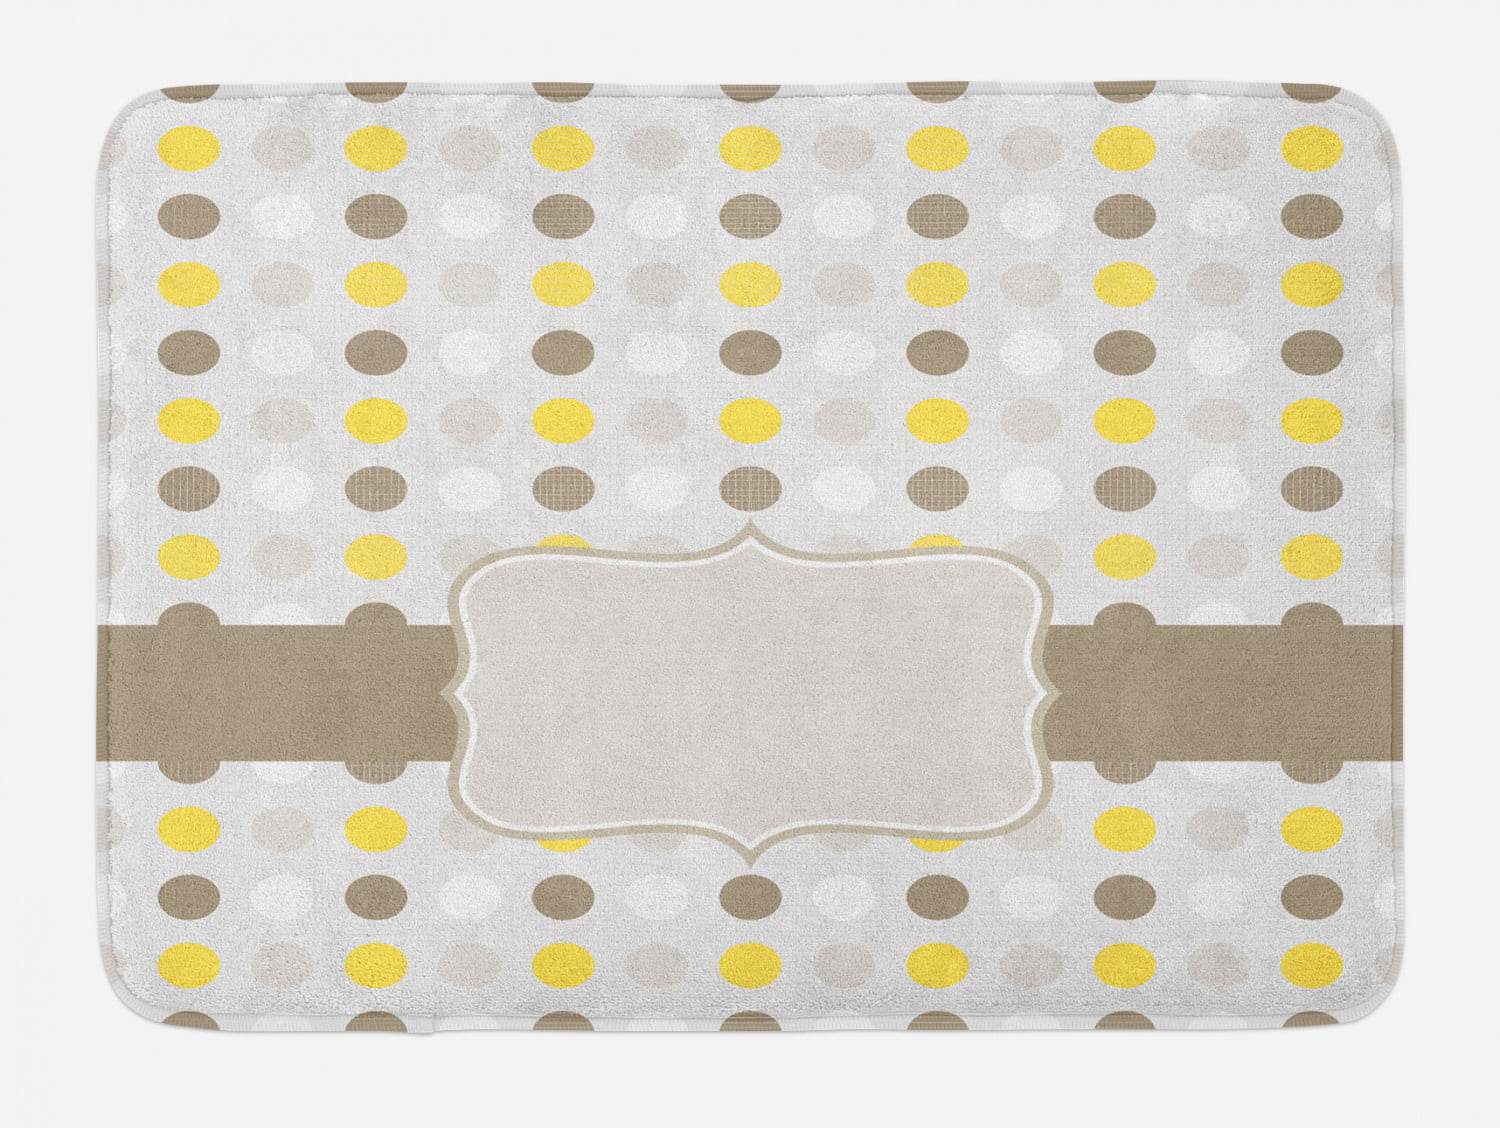 Details about    Gray and Yellow Bath Mat Abstract Art Grunge 20x 31 Inch/50x 80cm Yellow Gray 